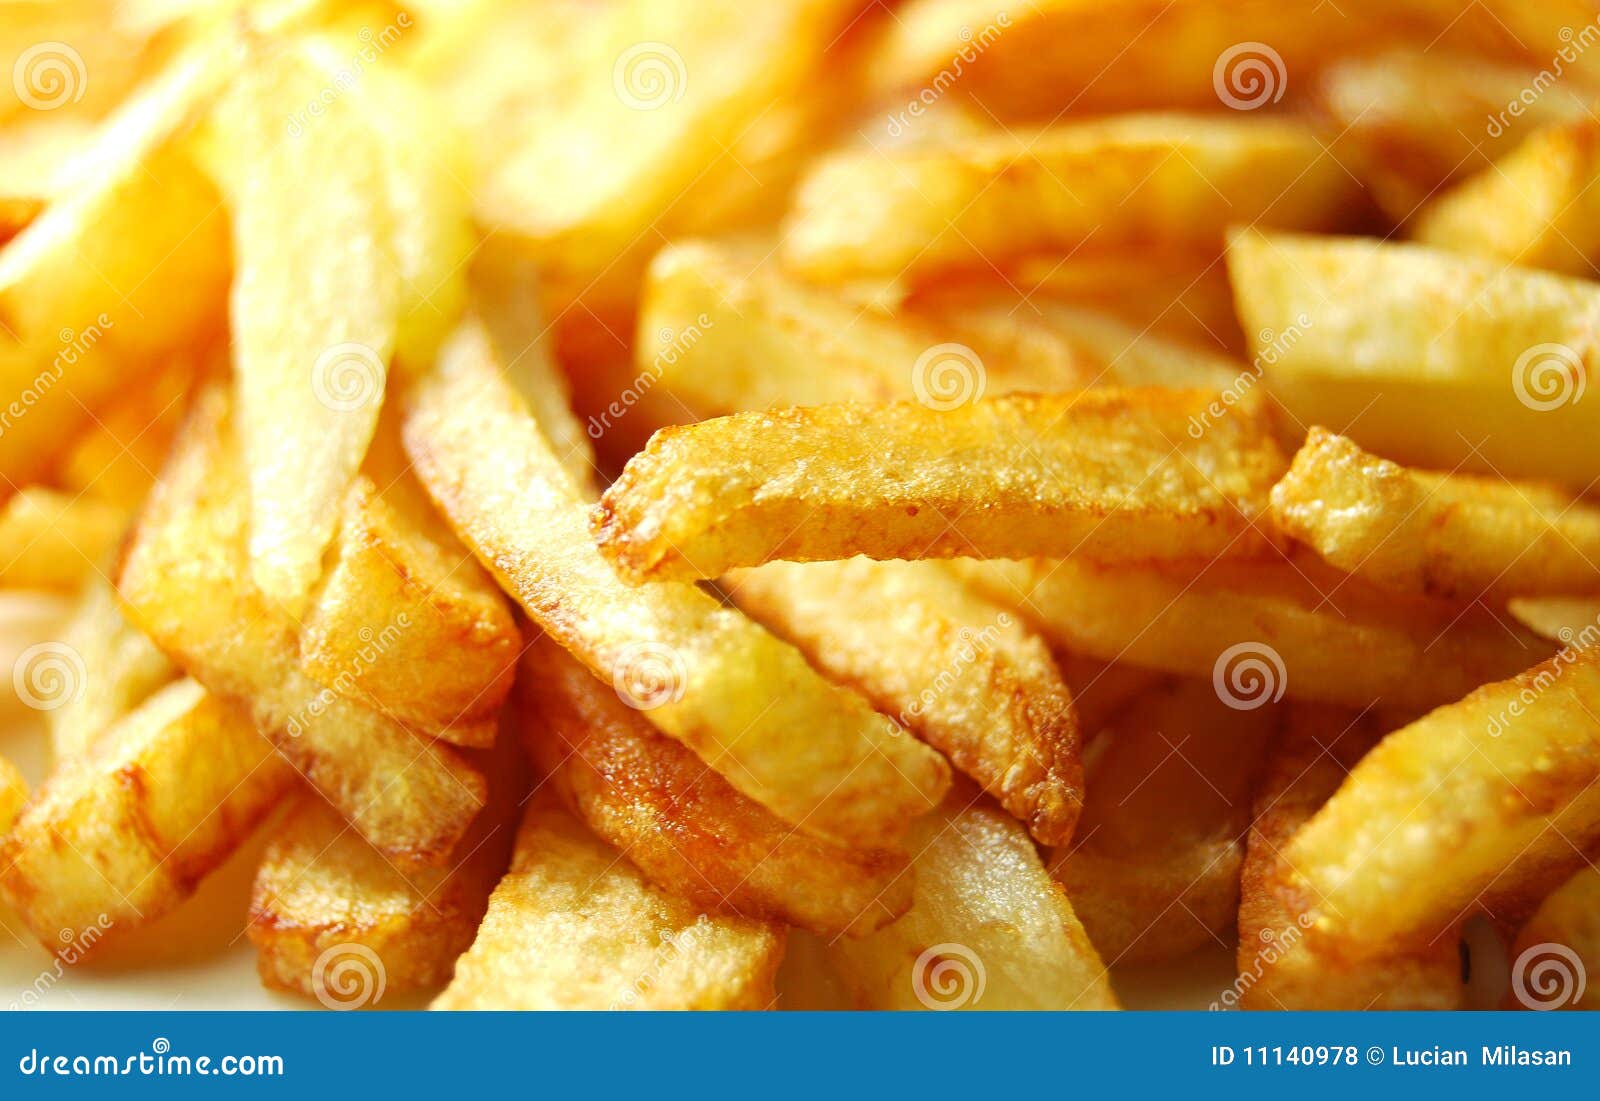 french fries background